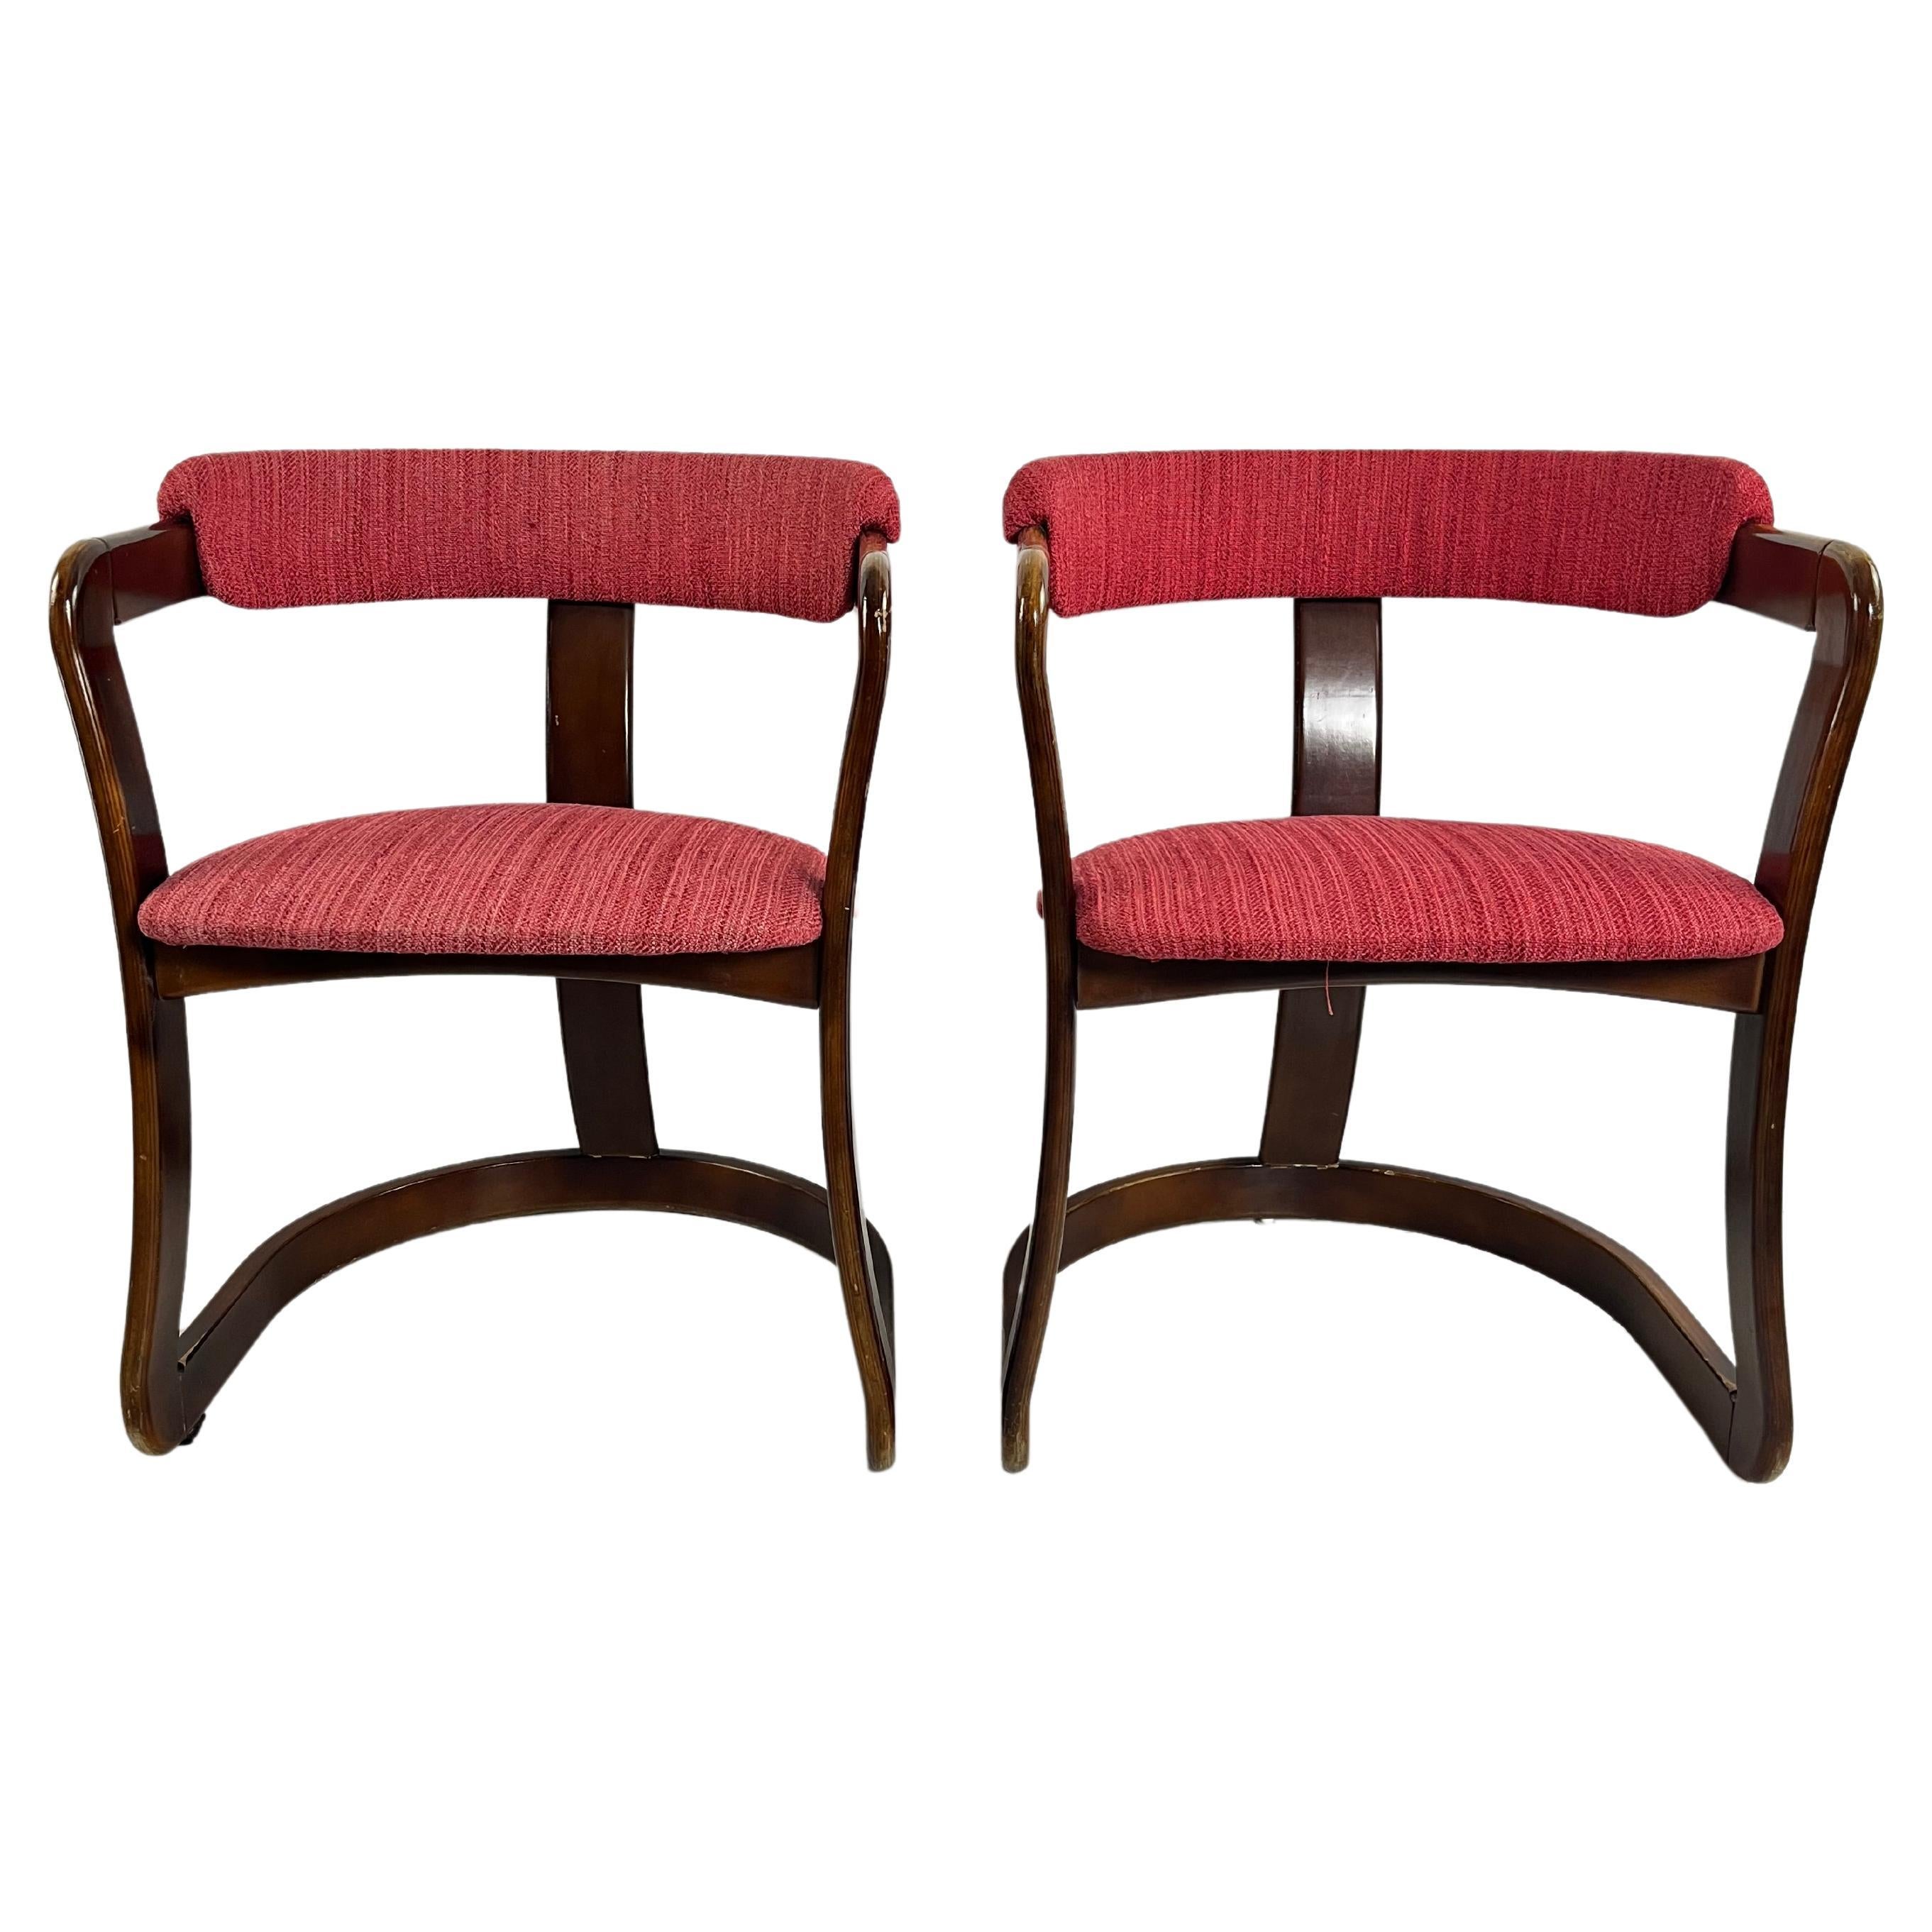 Set of 2 Mid-Century Curved Wooden Chairs Attributed to A. & P. Castiglioni For Sale